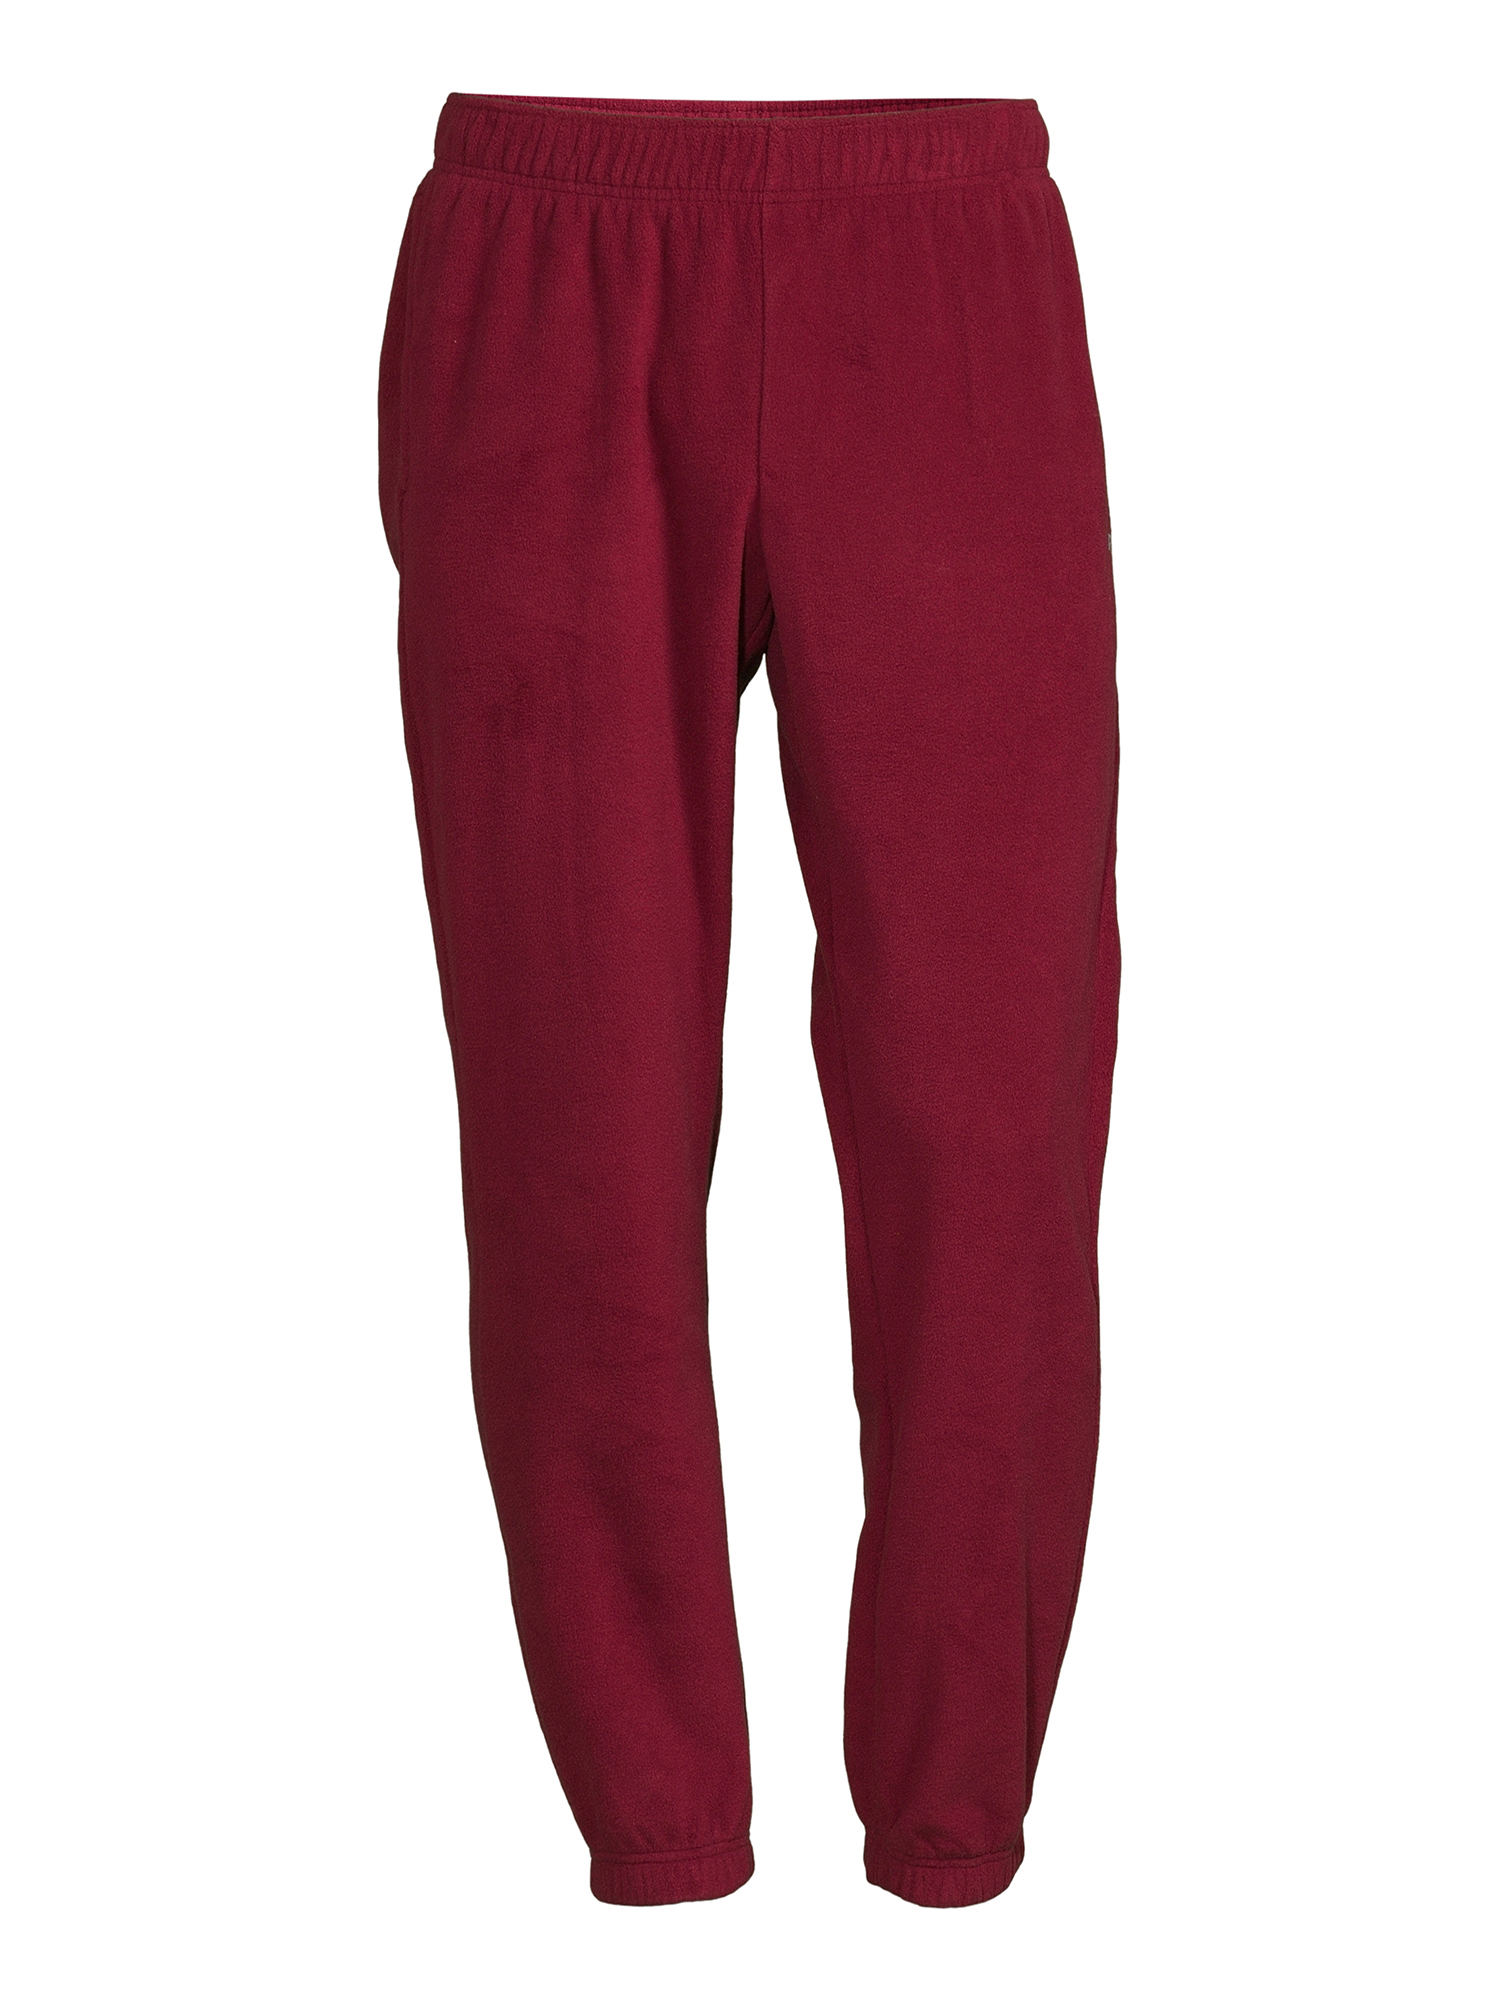 Russell Men's and Big Men's Microfleece Jogger Pants, Sizes S-3XL - image 5 of 5